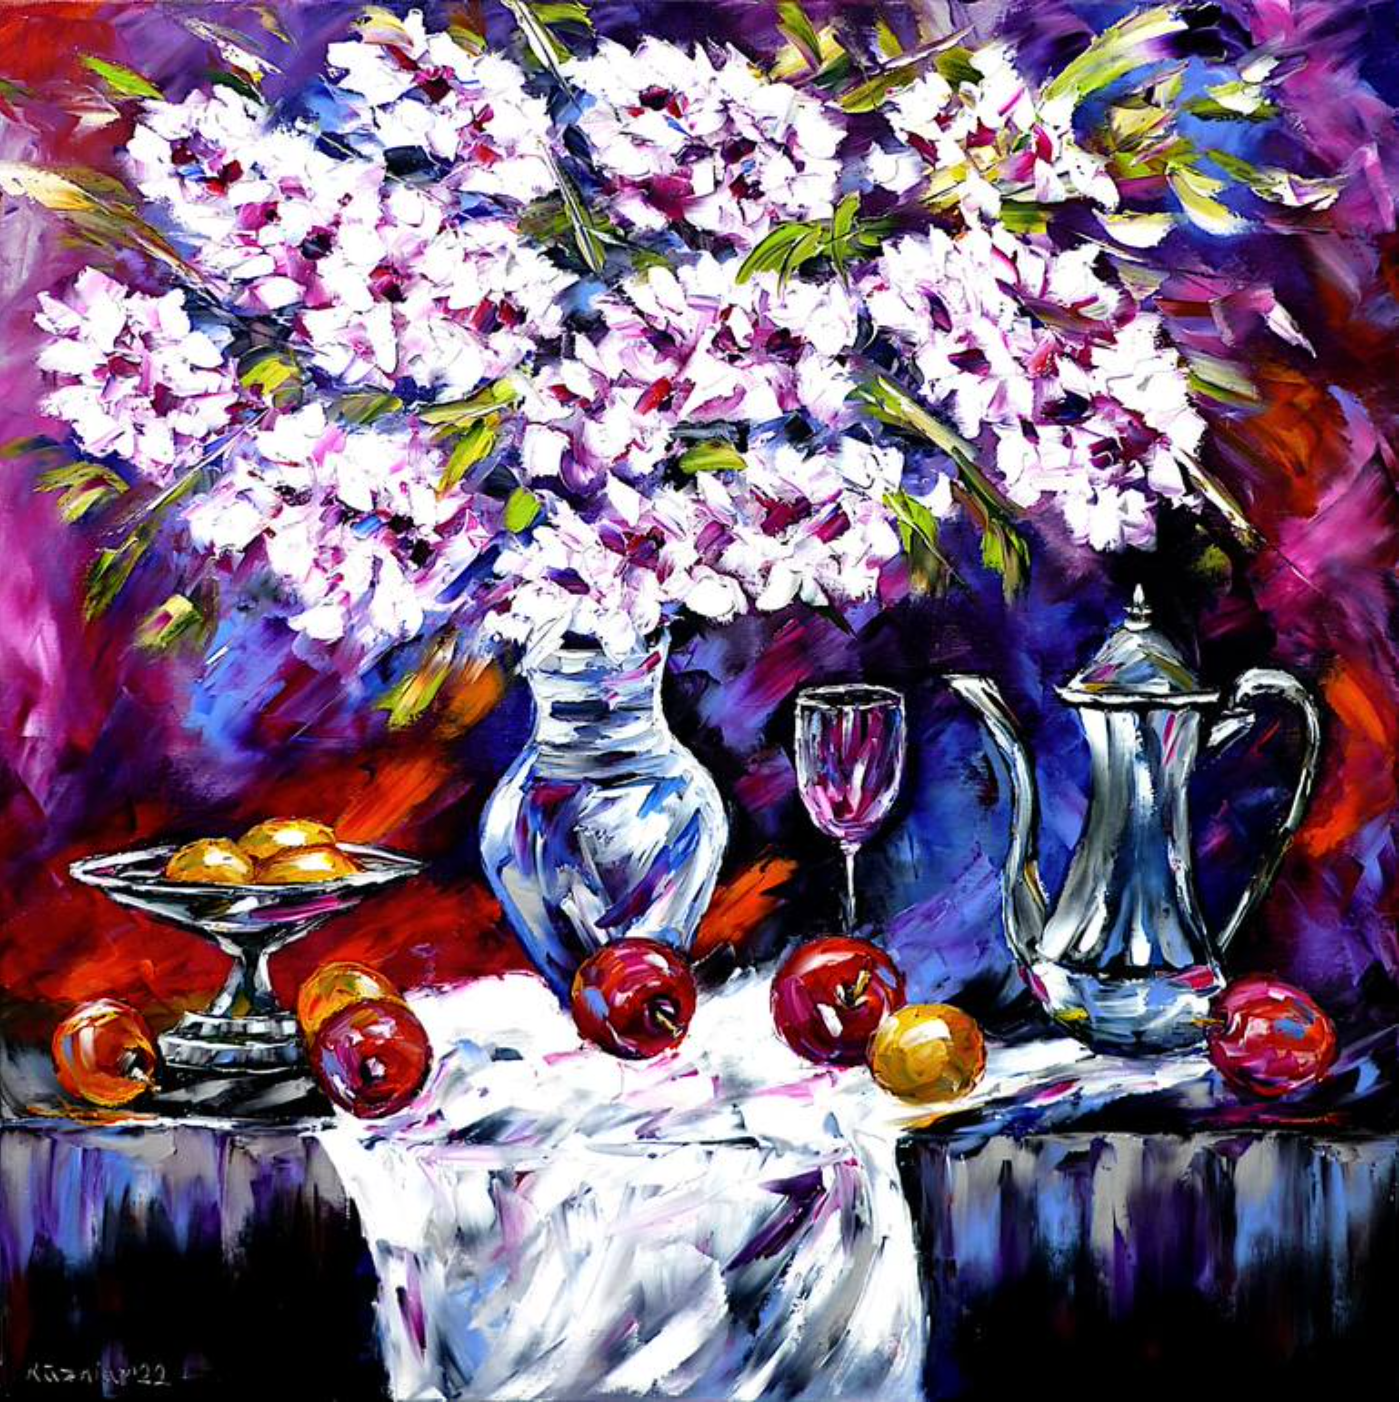 Mirek Kuzinar Expressionist Painting Still Life Bouquet of Flowers White Cherry Blossoms in Glass Vase Apples and Silver Fir